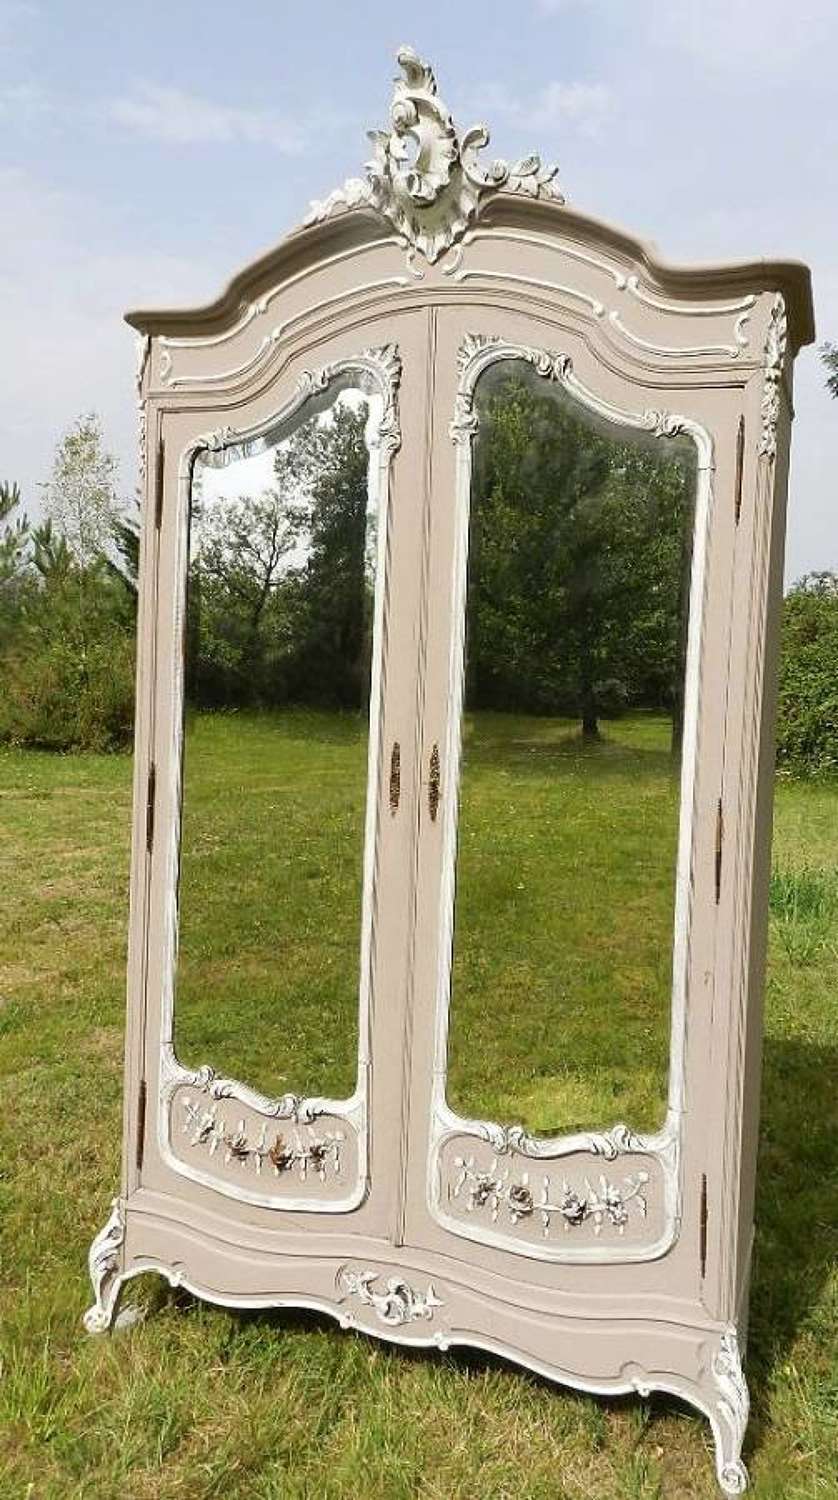 C19 ANTIQUE FRENCH LOUIS XV PAINTED ARMOIRE WARDROBE BOOKCASE